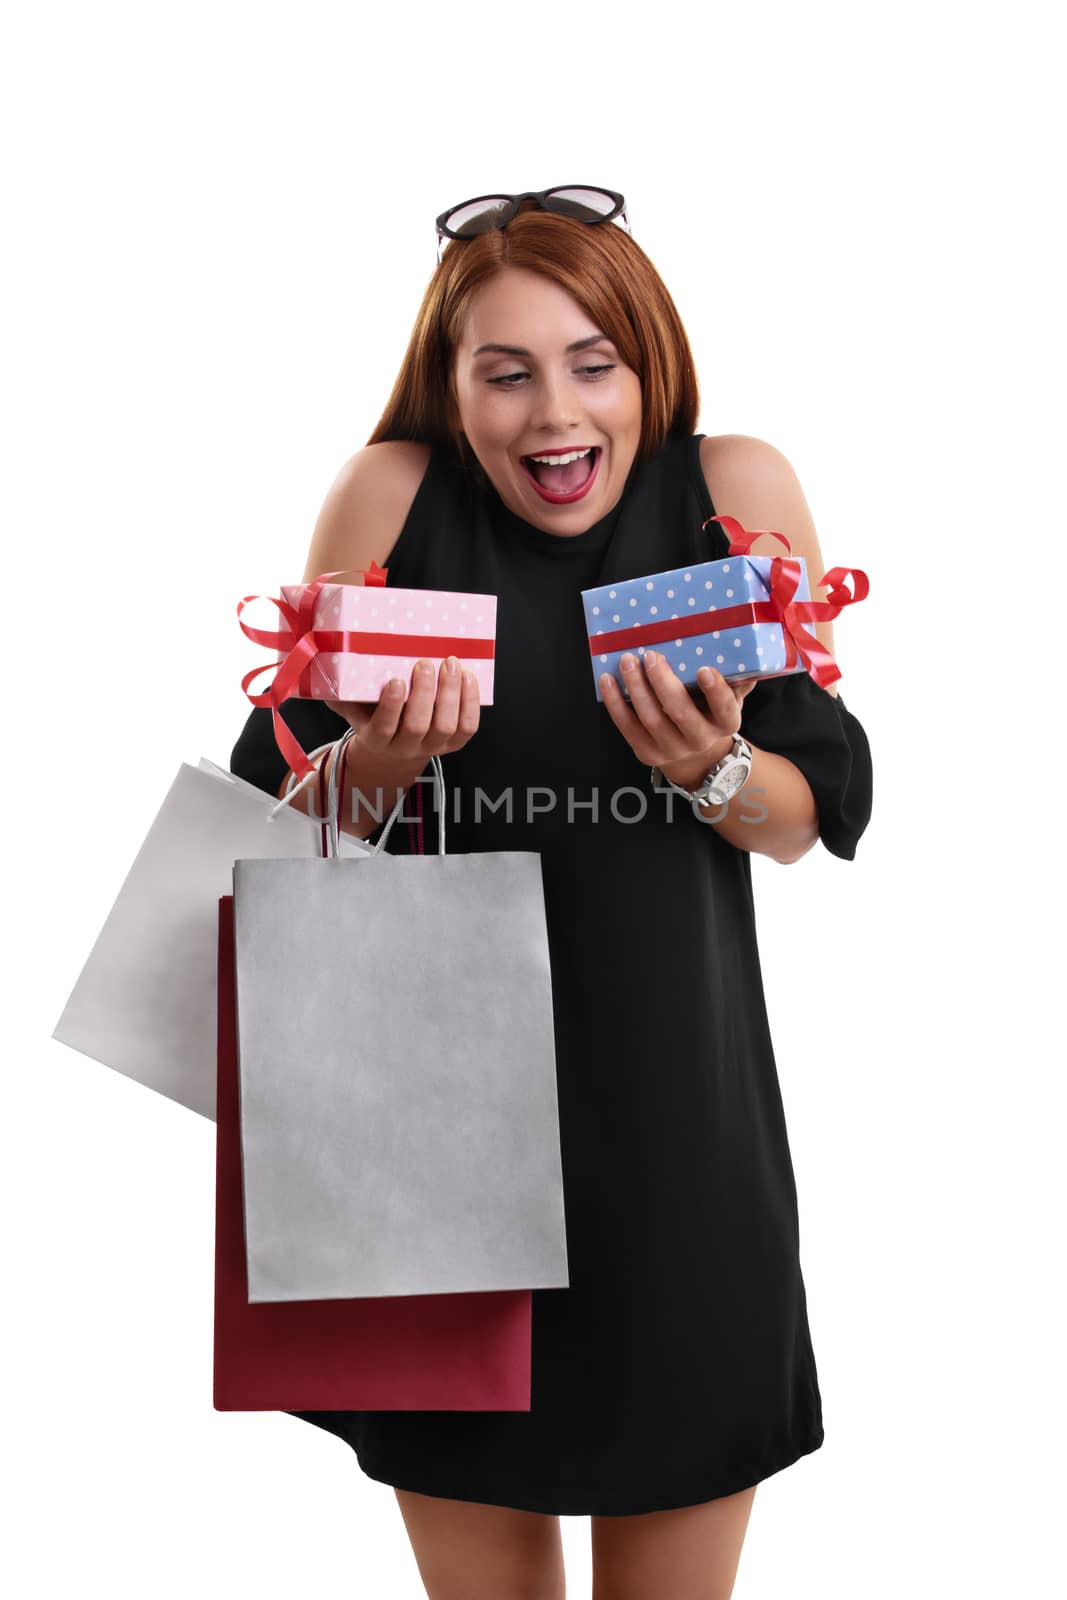 Excited beautiful young woman in a black dress holding shopping bags and presents, isolated on a white background.